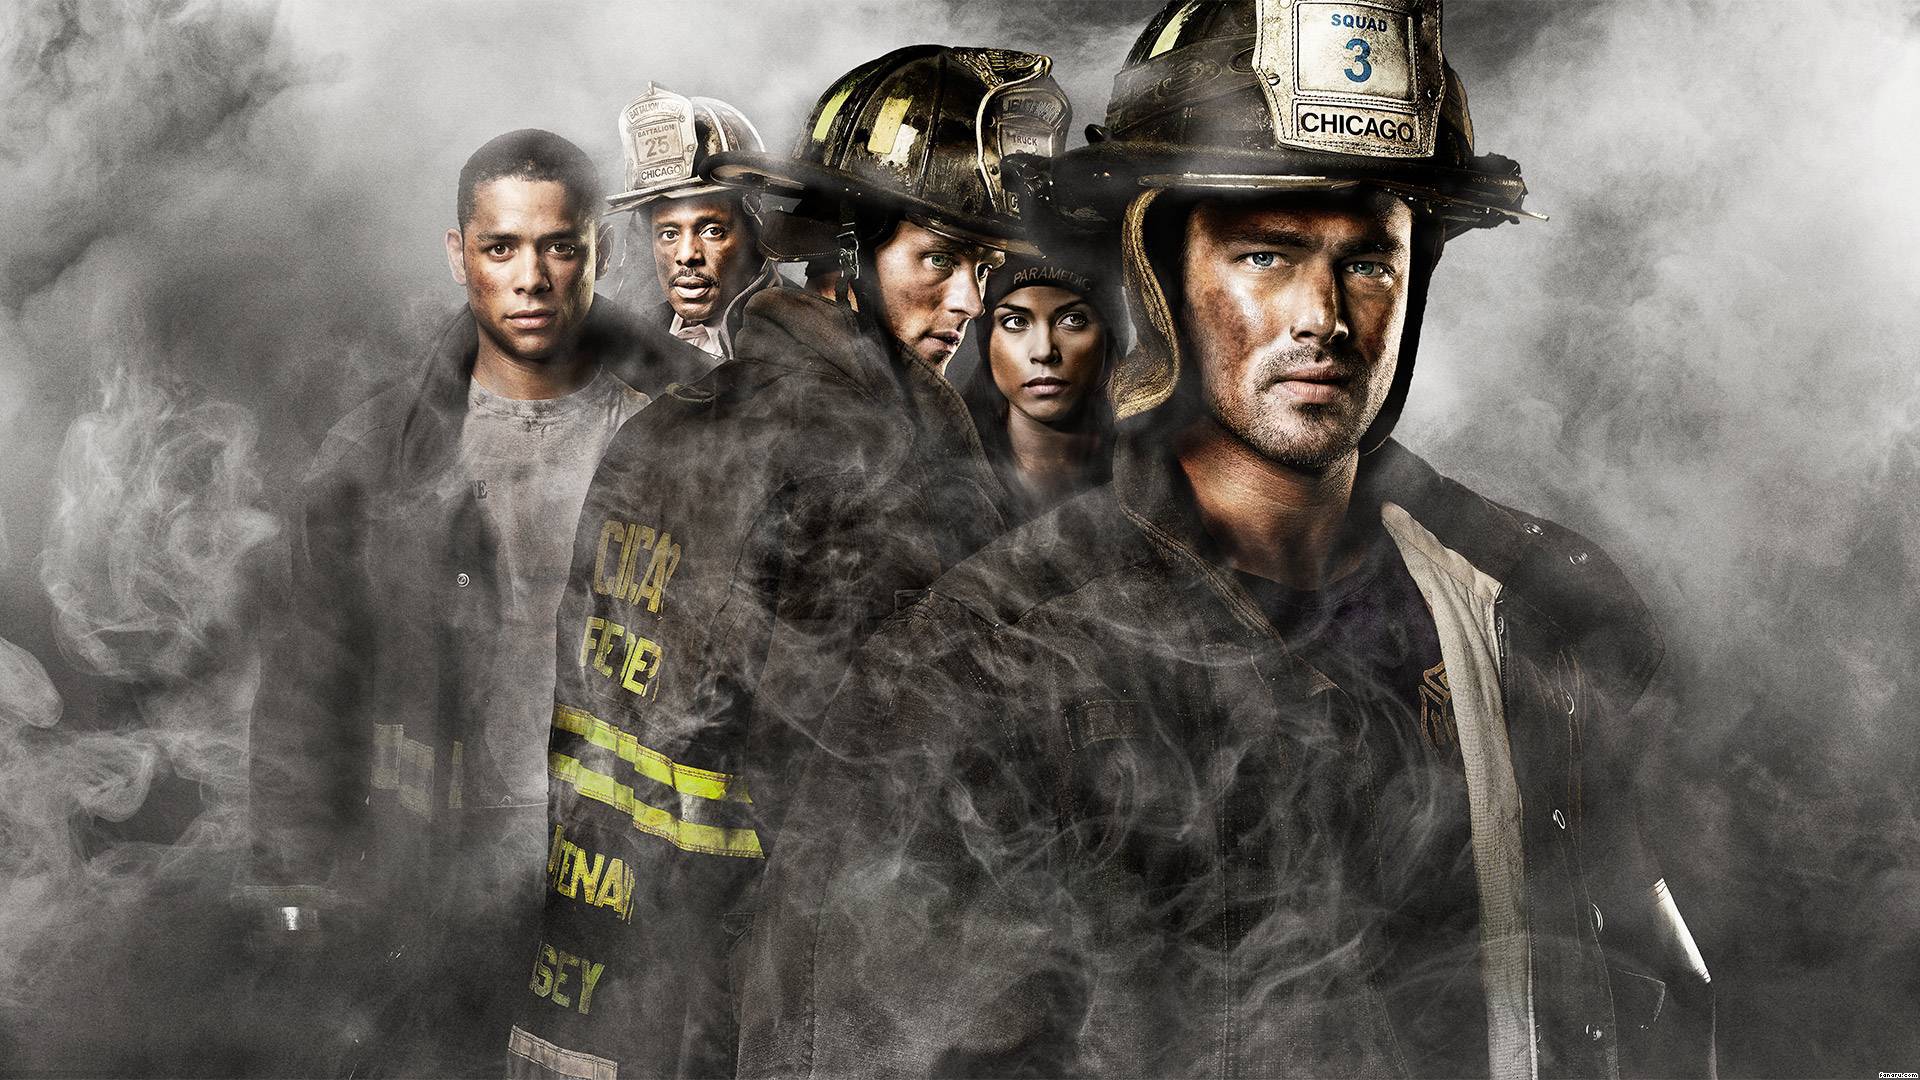 Free Download Chicago Fire Hd Wallpaper on our website with great care. 